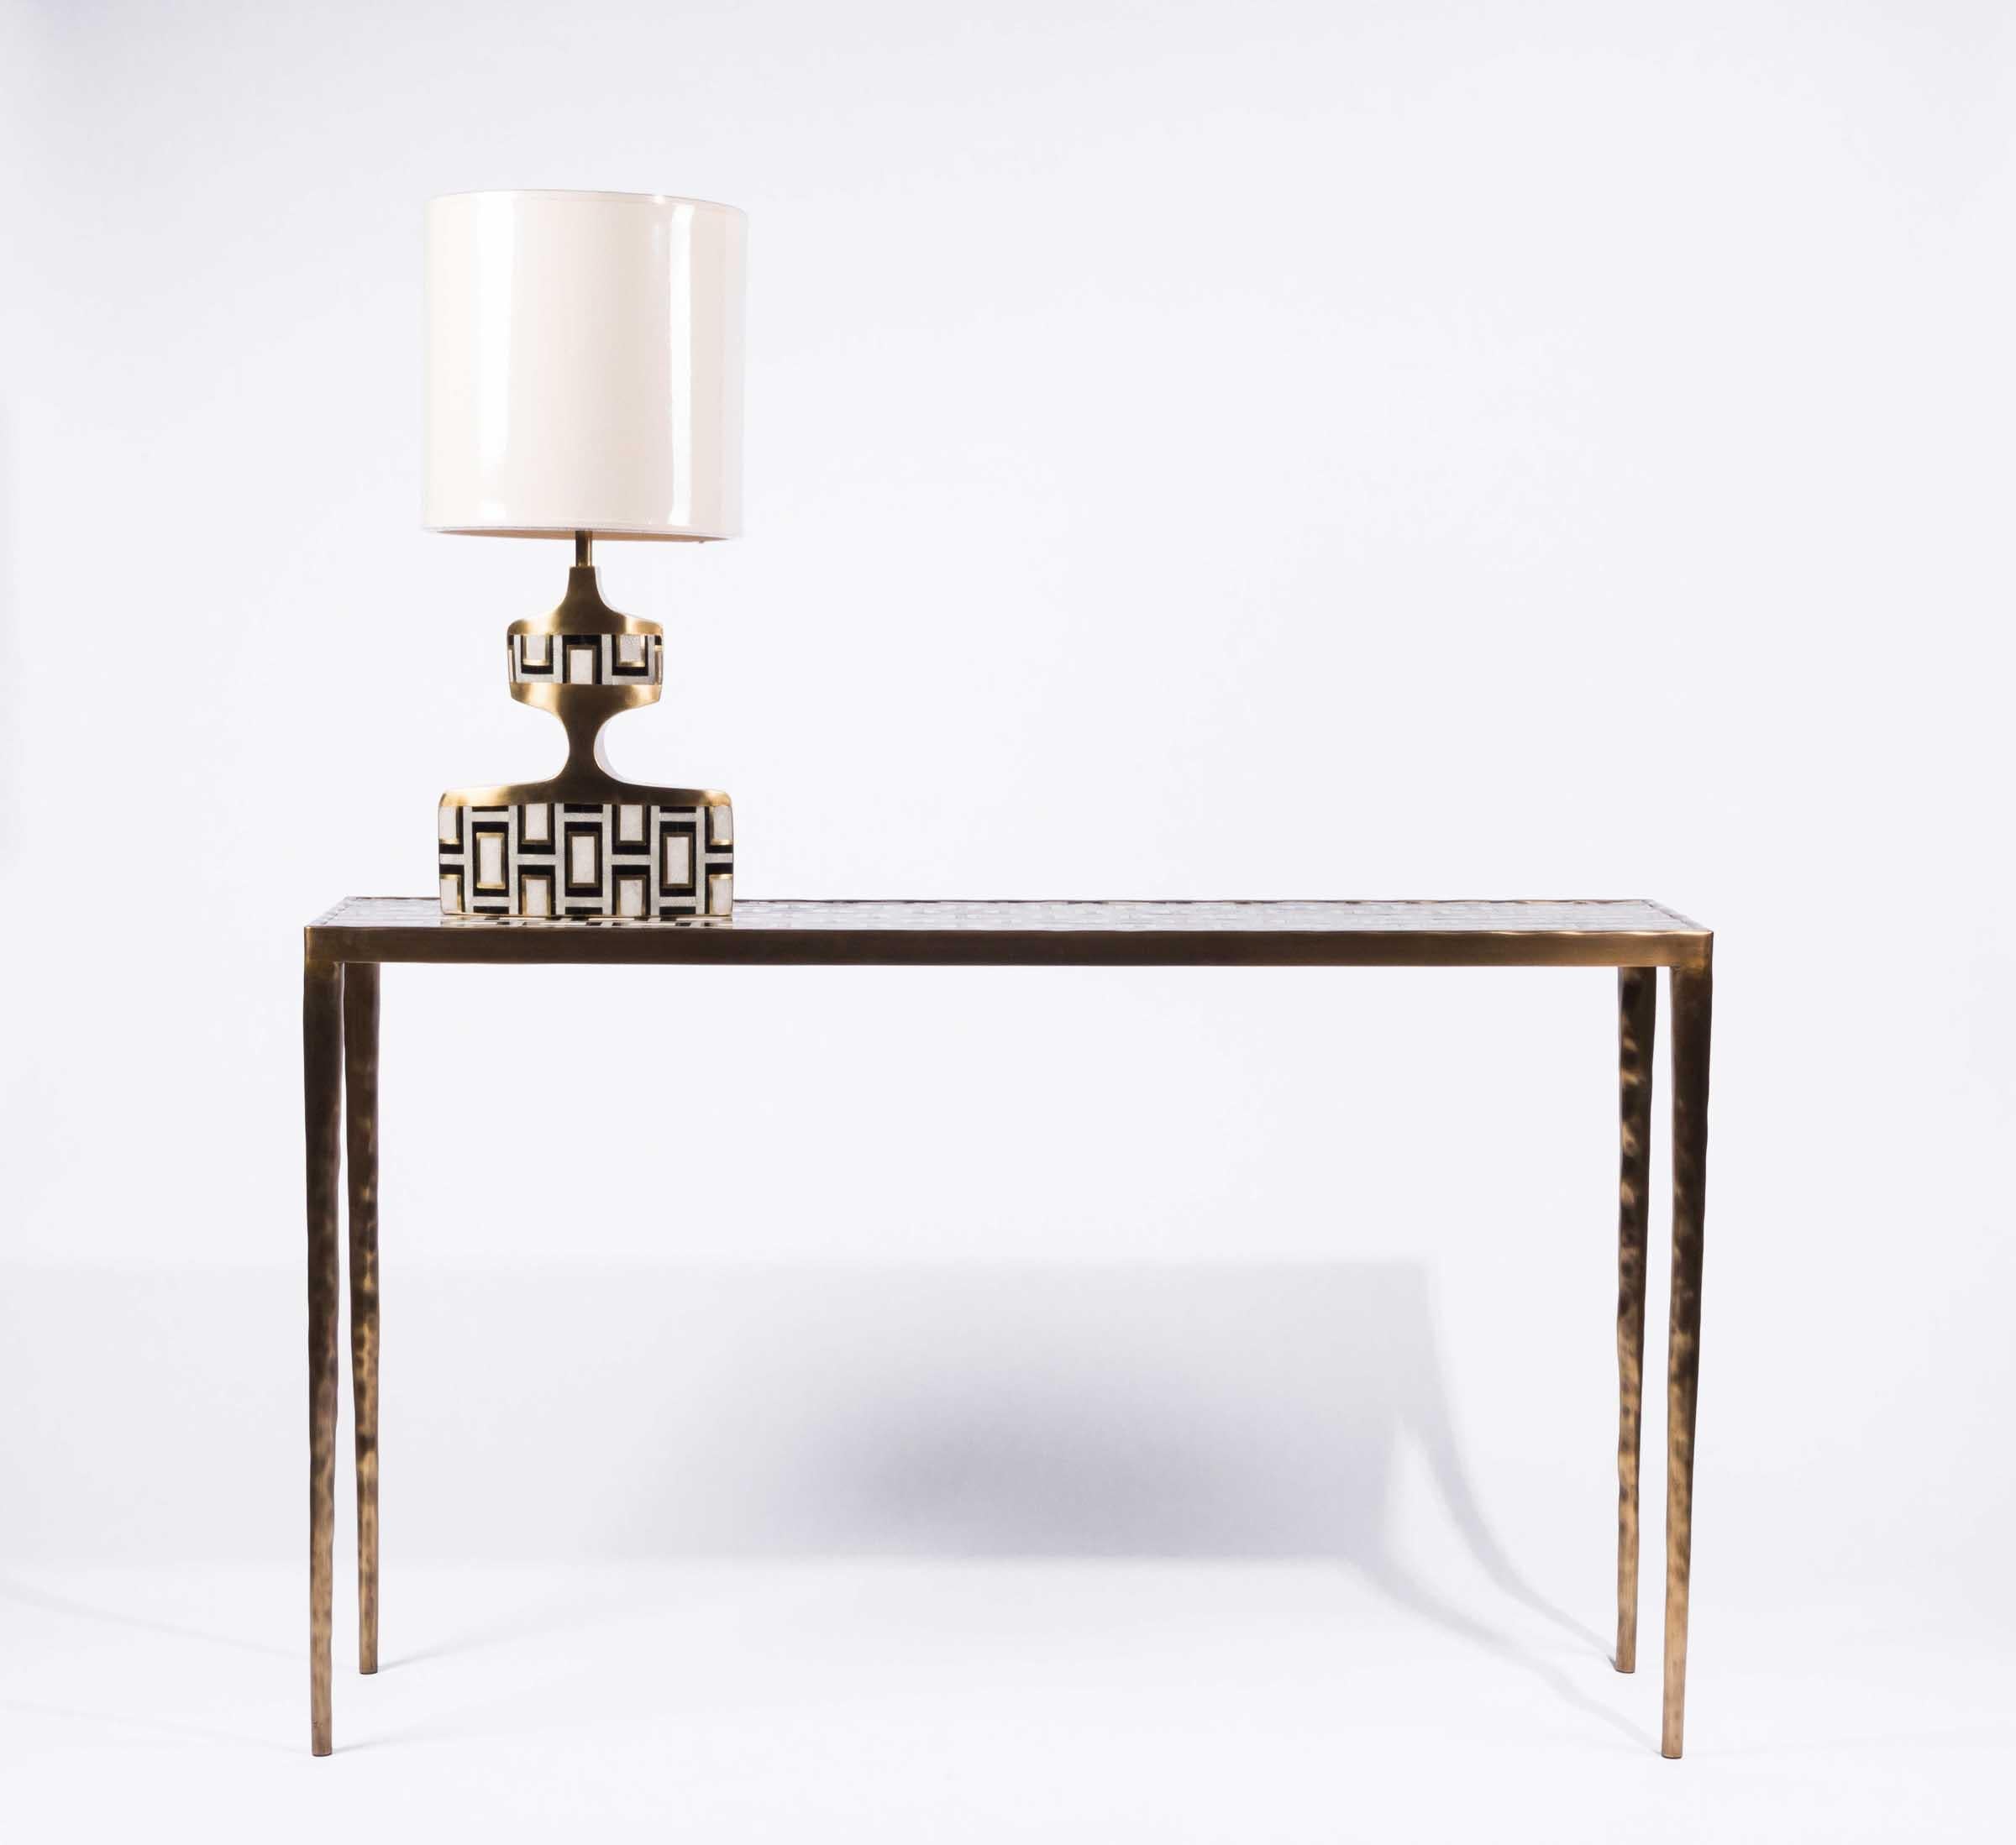 The block pattern console inlaid in a mixture of cream shagreen, coal black pen shell and bronze patina brass demonstrates the incredible hand-craftsmanship of Augousti. The geometric pattern against the simple but elegant shape of the console,